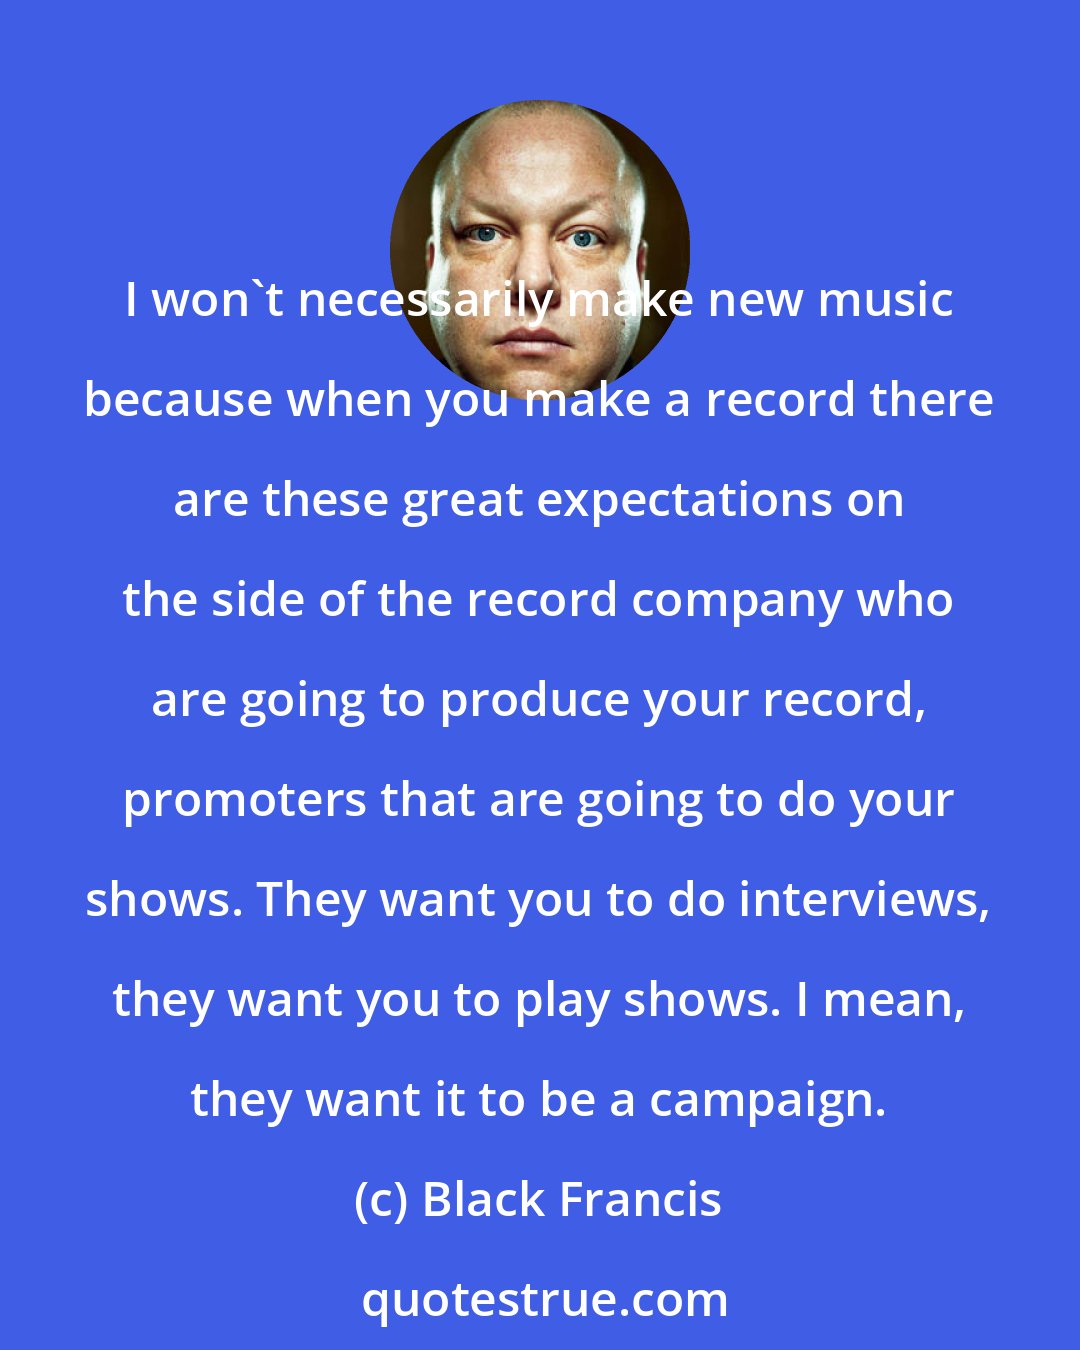 Black Francis: I won't necessarily make new music because when you make a record there are these great expectations on the side of the record company who are going to produce your record, promoters that are going to do your shows. They want you to do interviews, they want you to play shows. I mean, they want it to be a campaign.